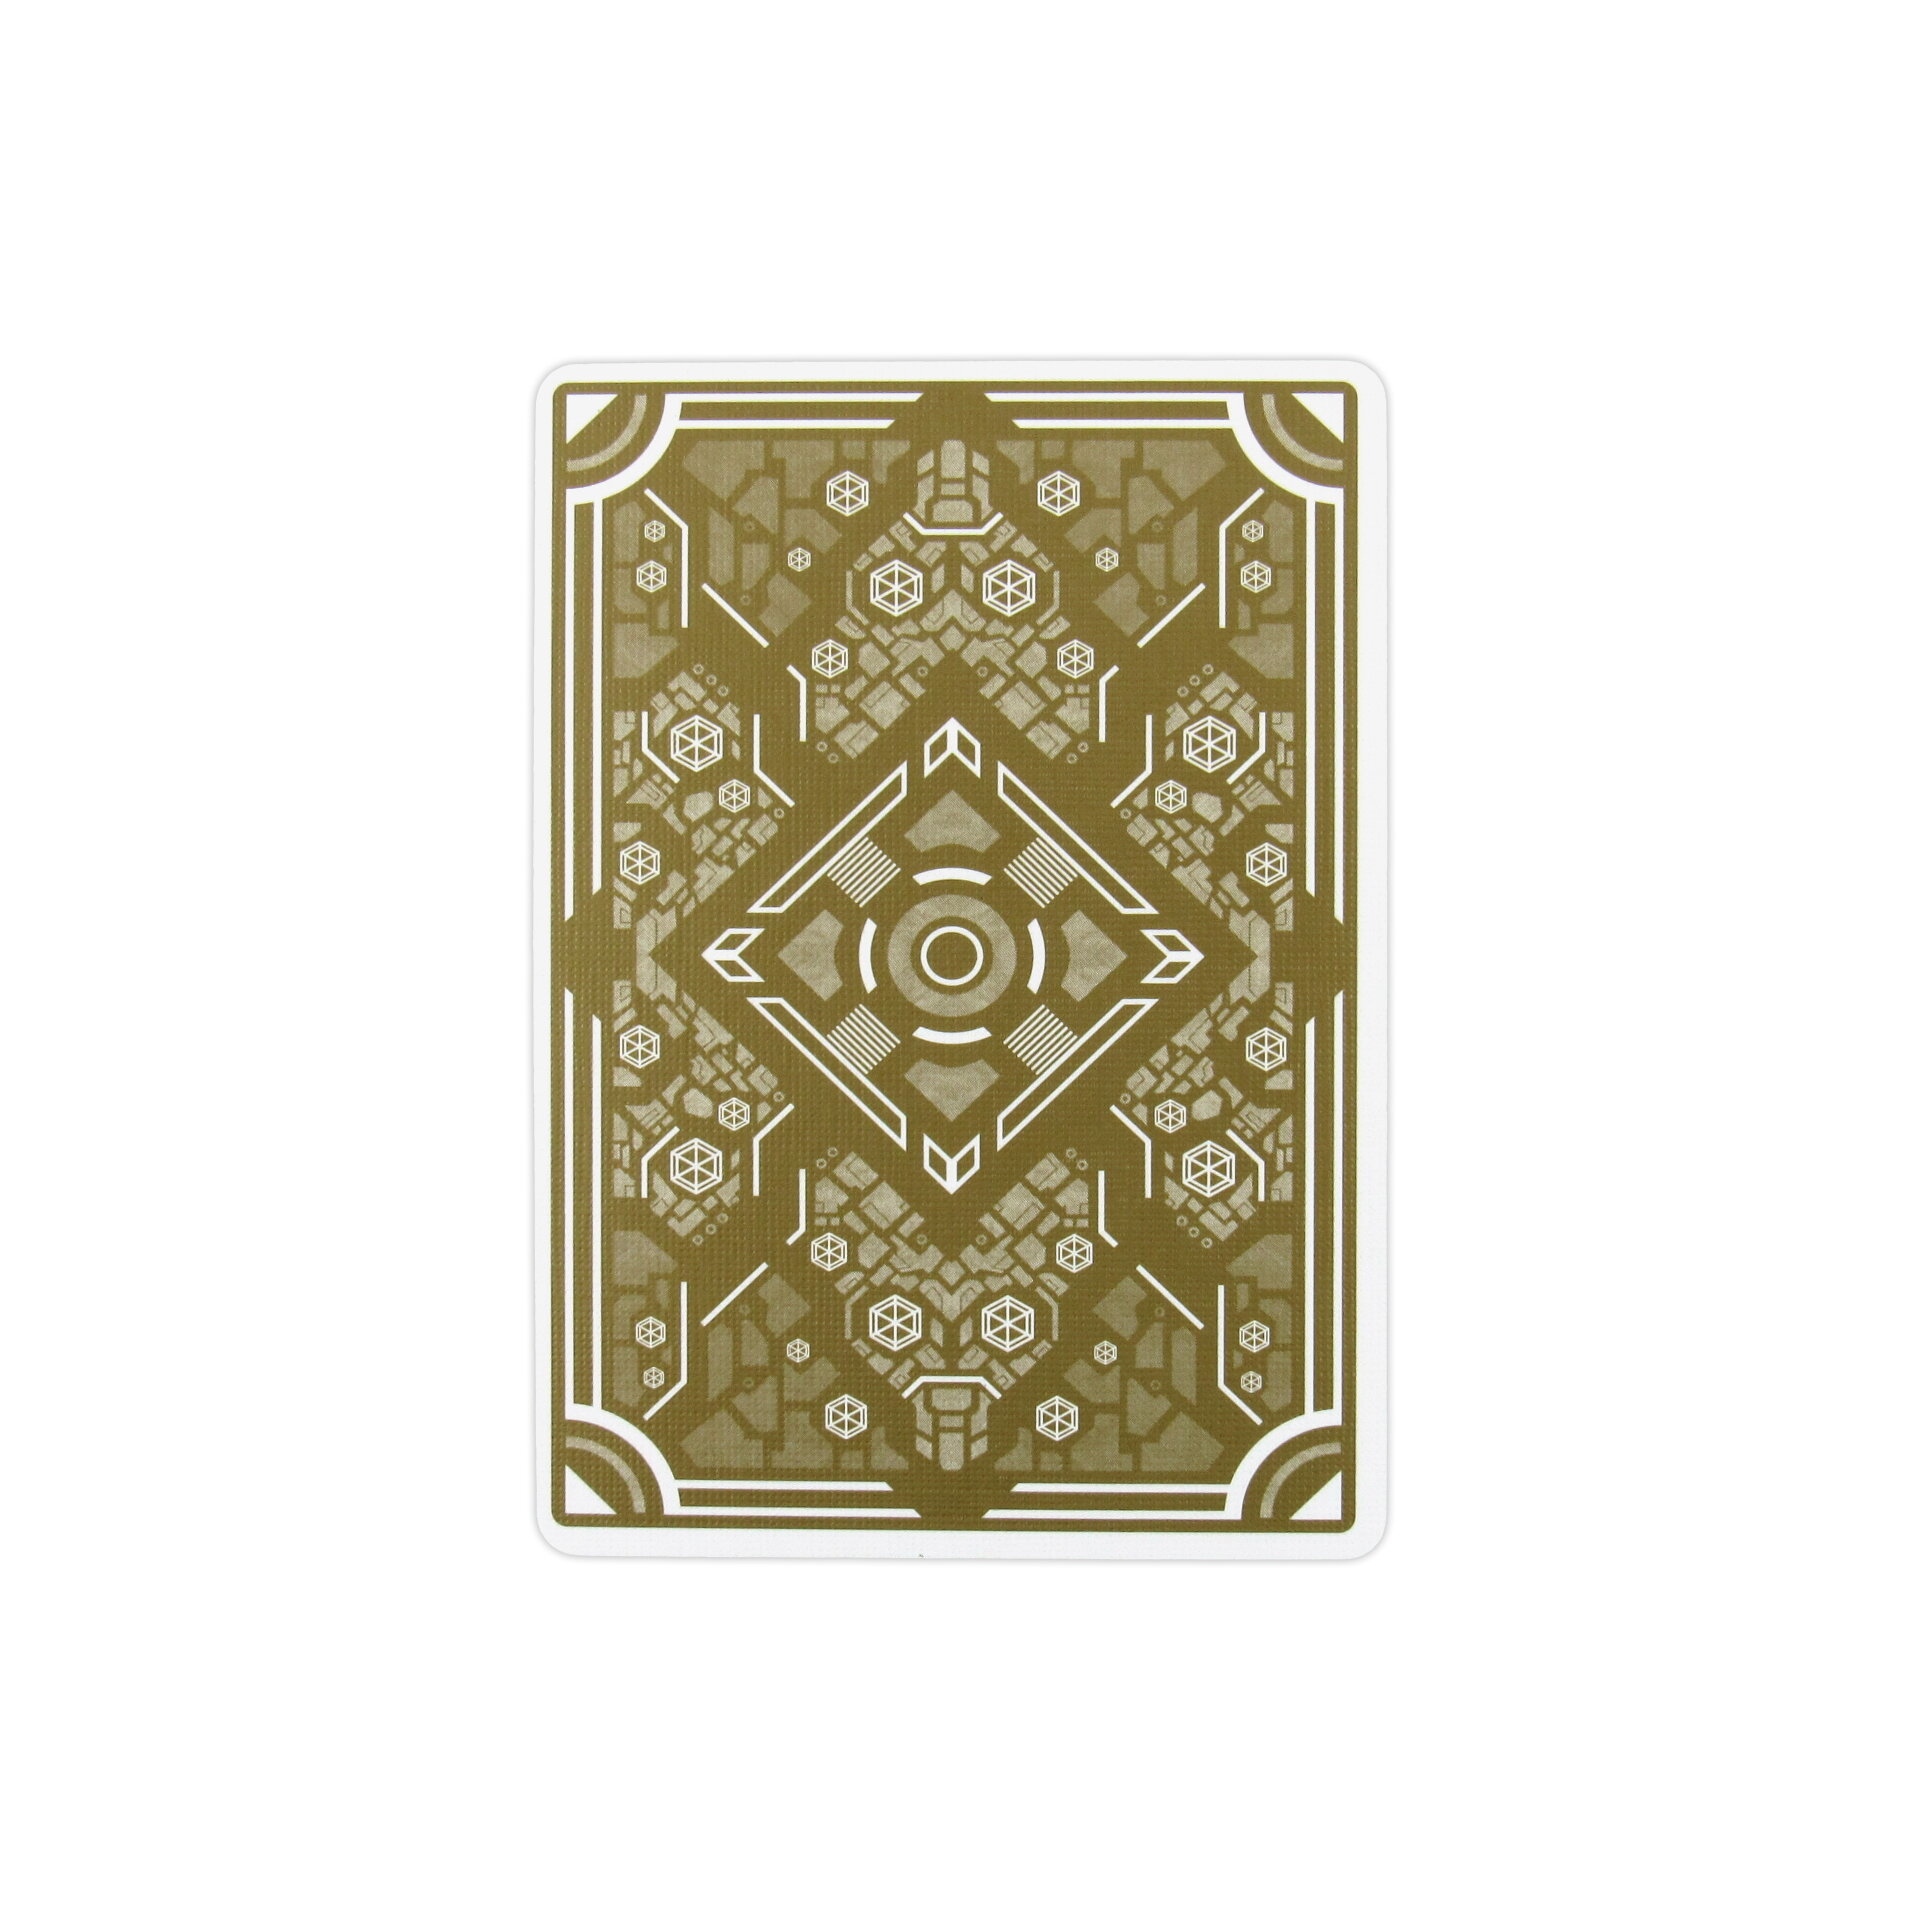 Bicycle Utopia White and Gold Playing Cards Deck Brand New